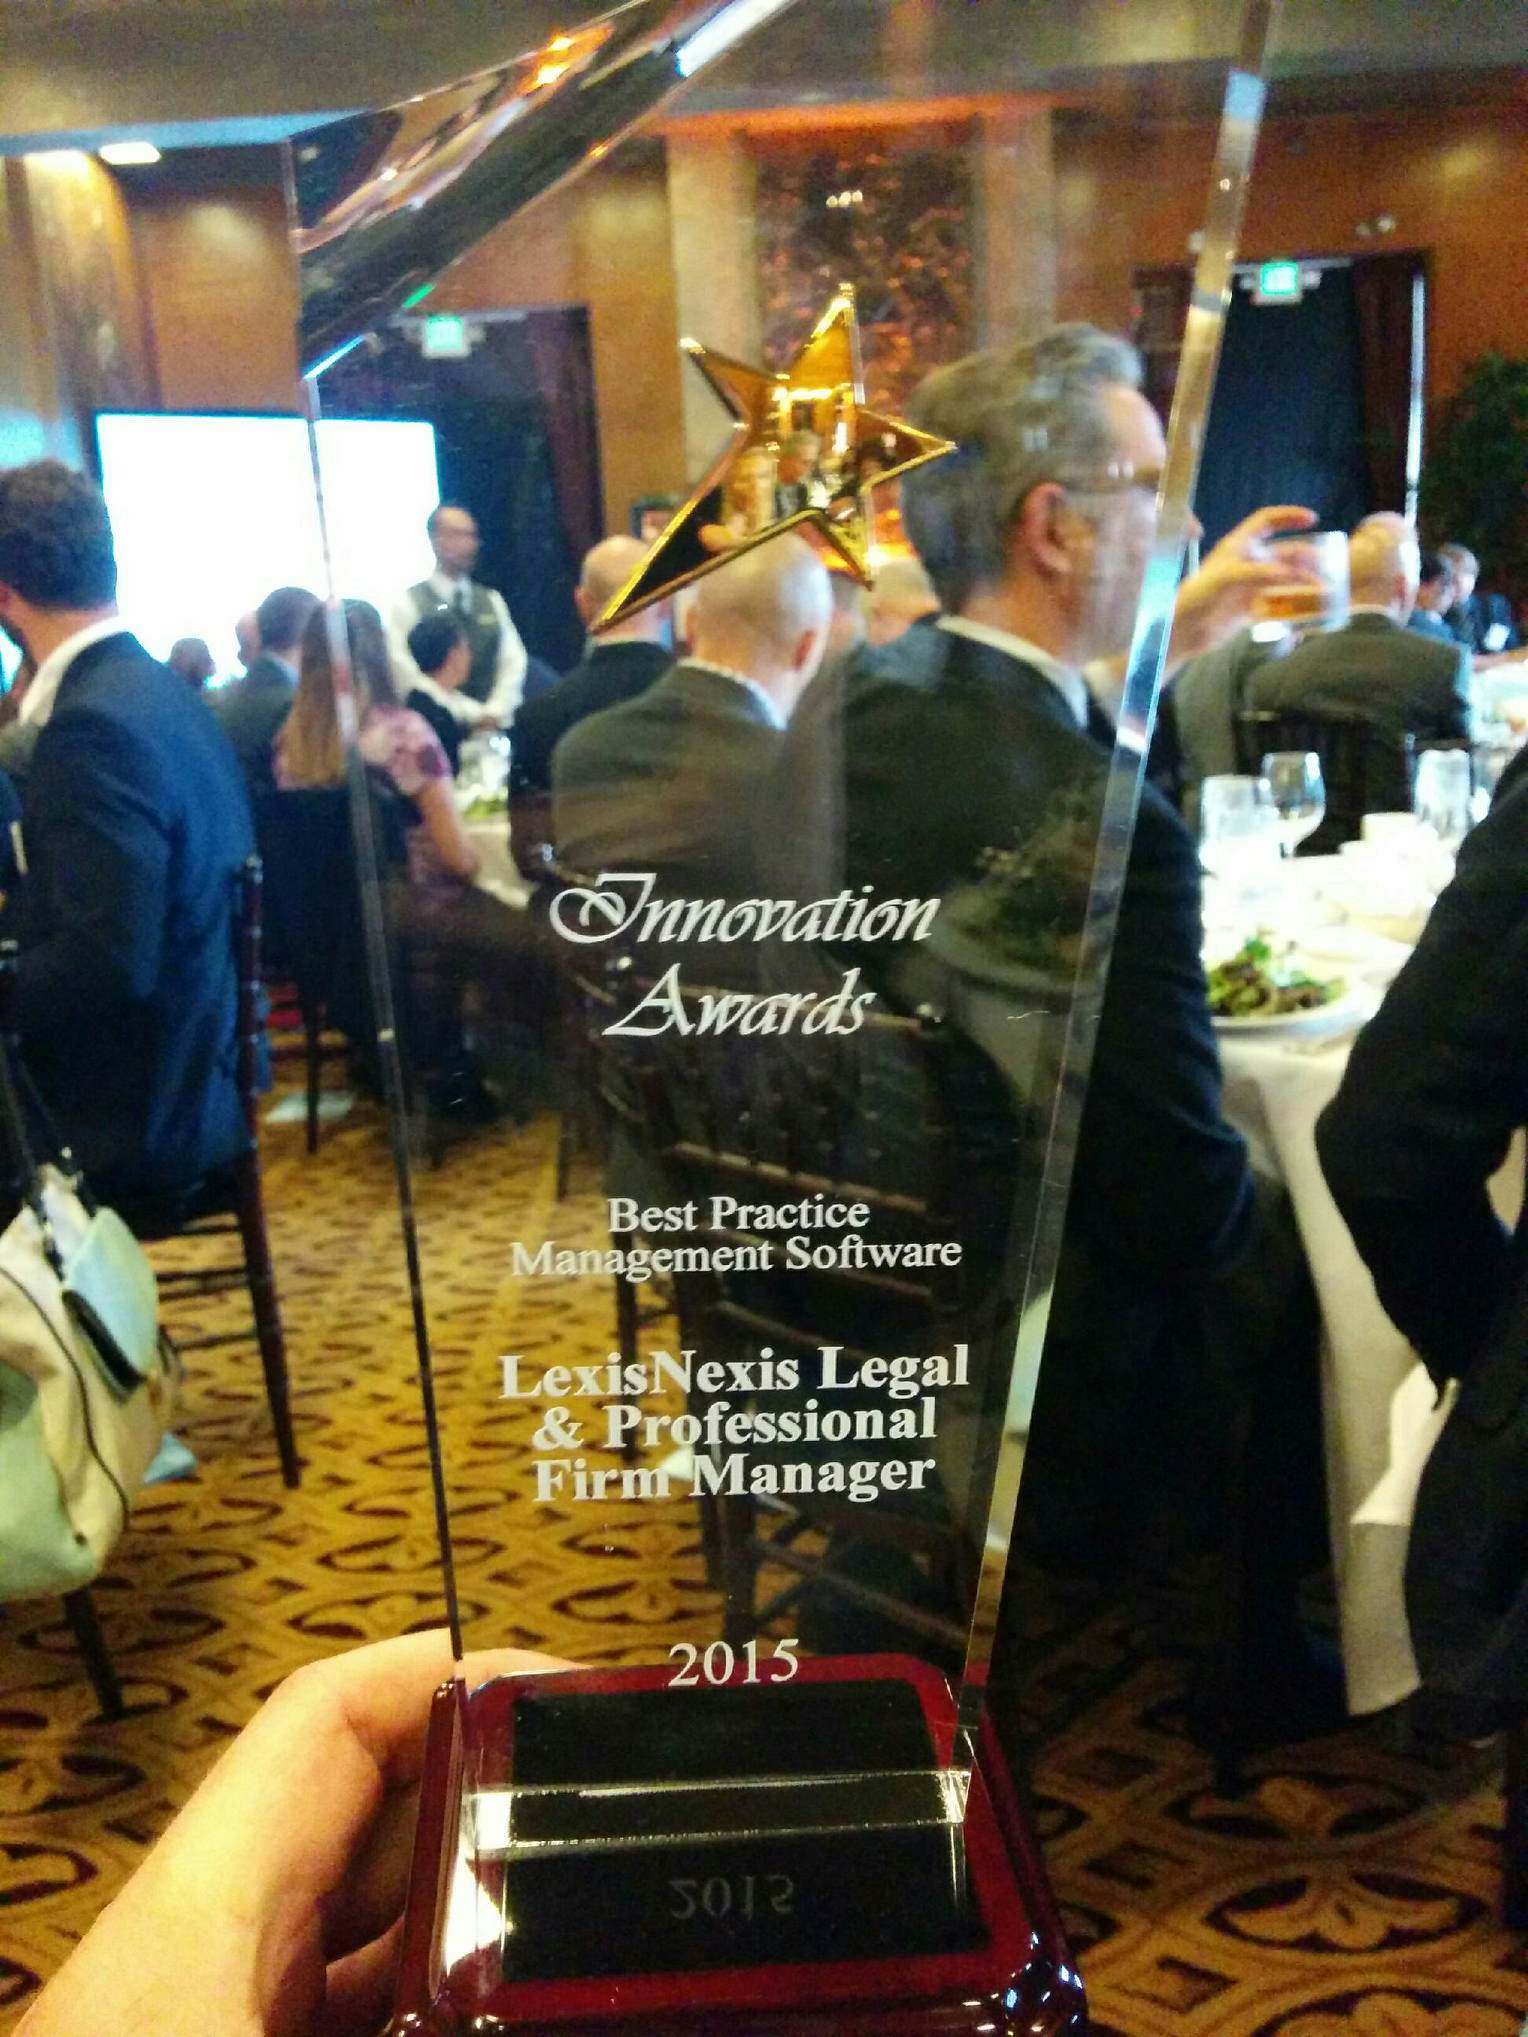 Firm Manager named best practice management software” at the Legaltech News Innovation Awards.